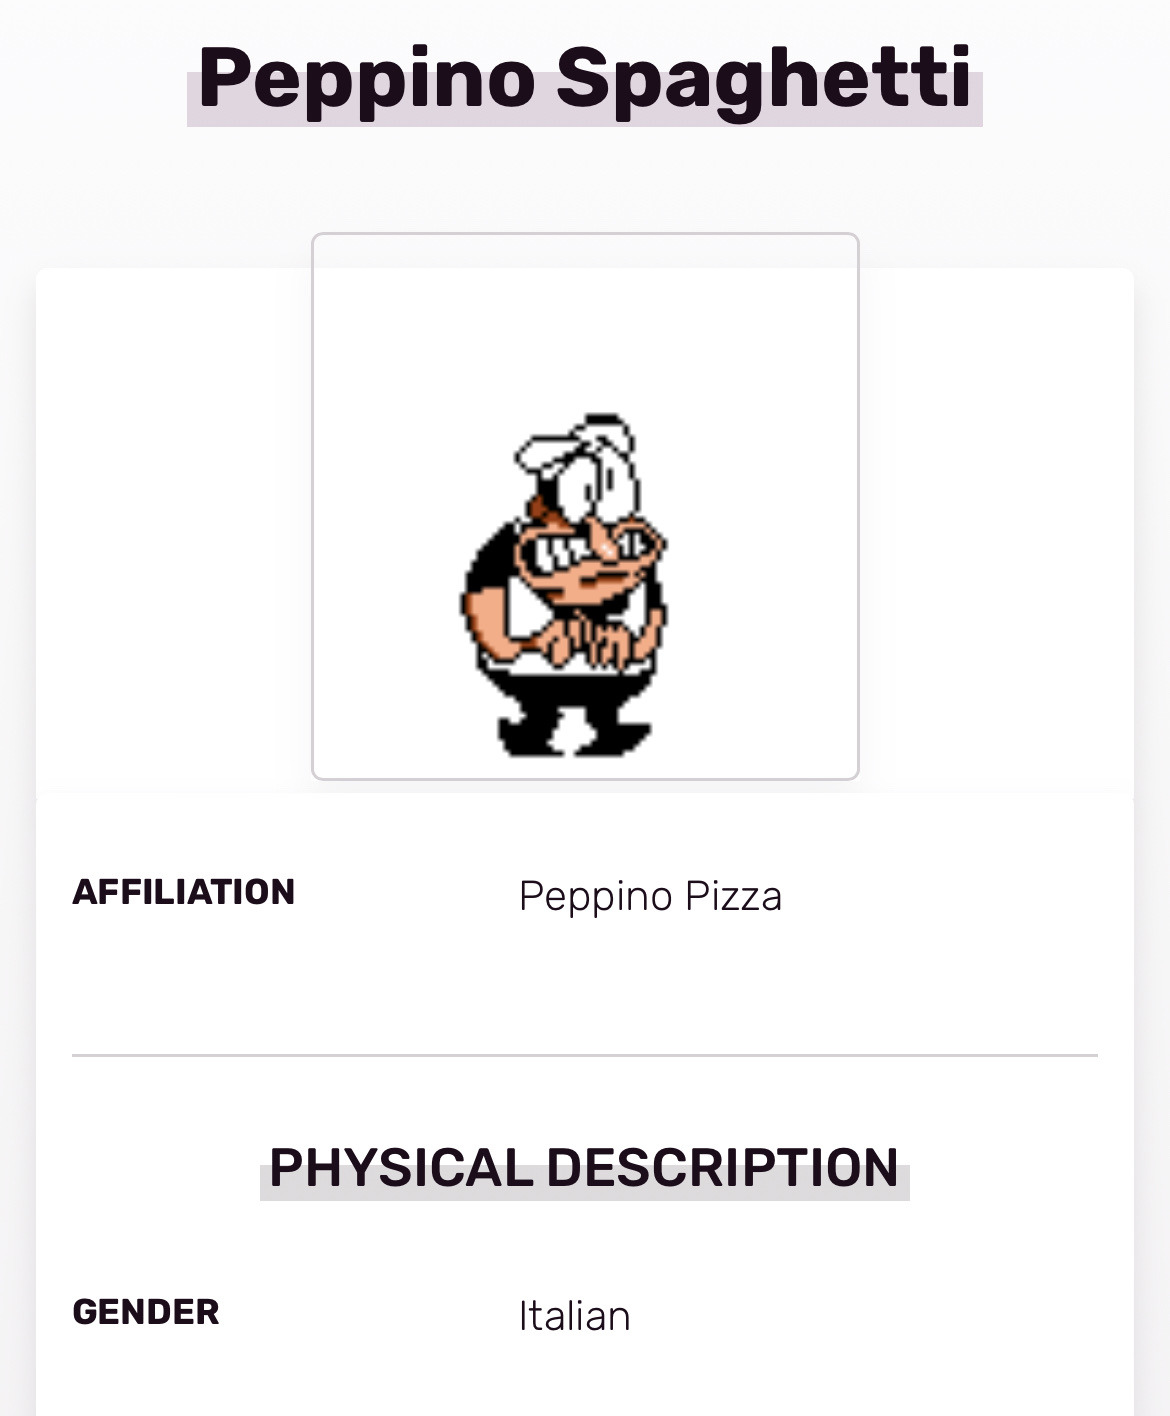 Kaufmo so me fr (Man I'm dead lol (joke)) — catching up on pizza tower lore  using the wiki and